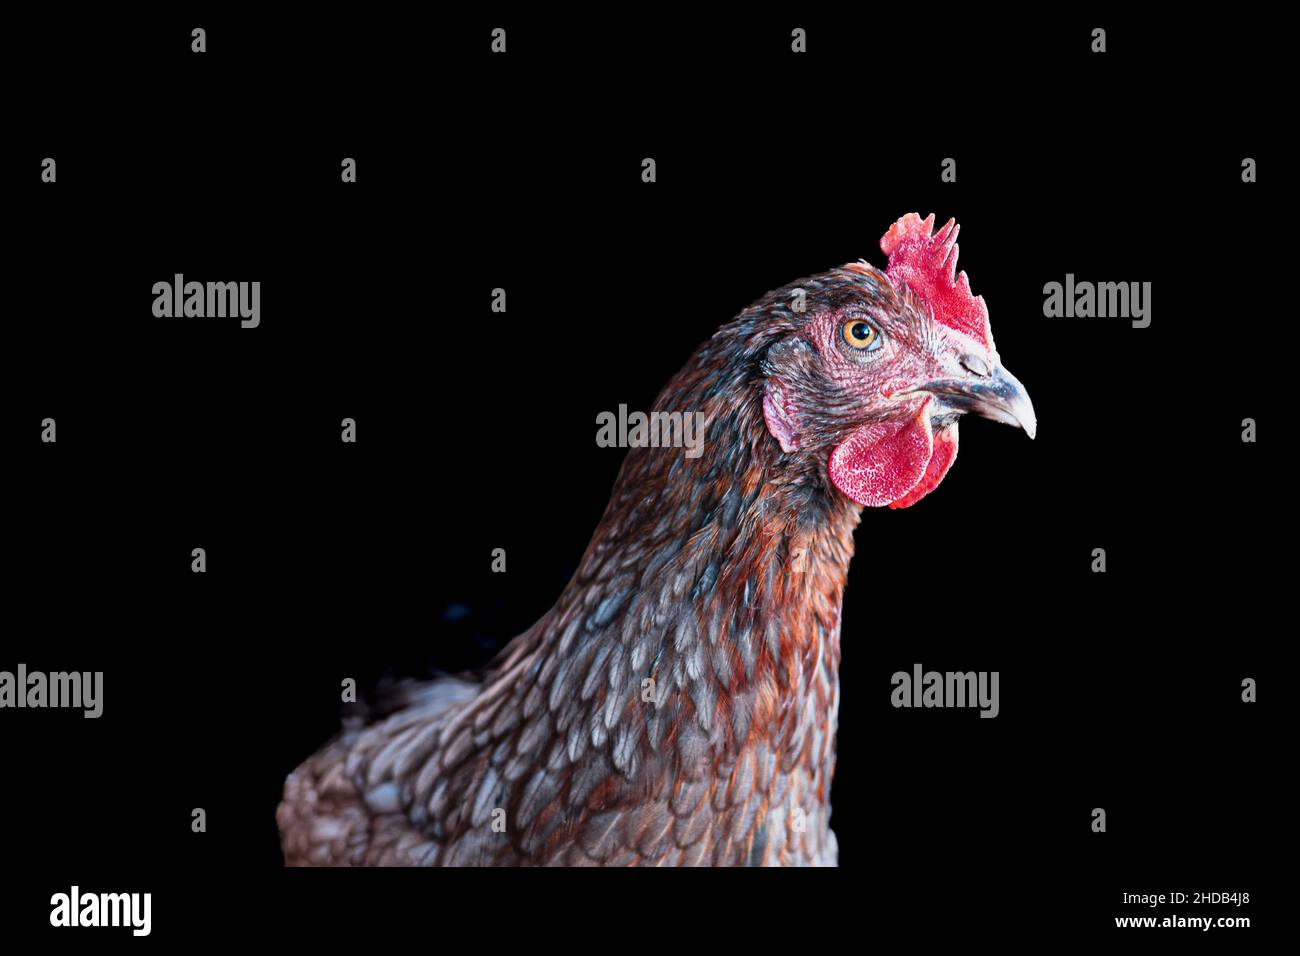 Welsummer Hen profile with black background Stock Photo